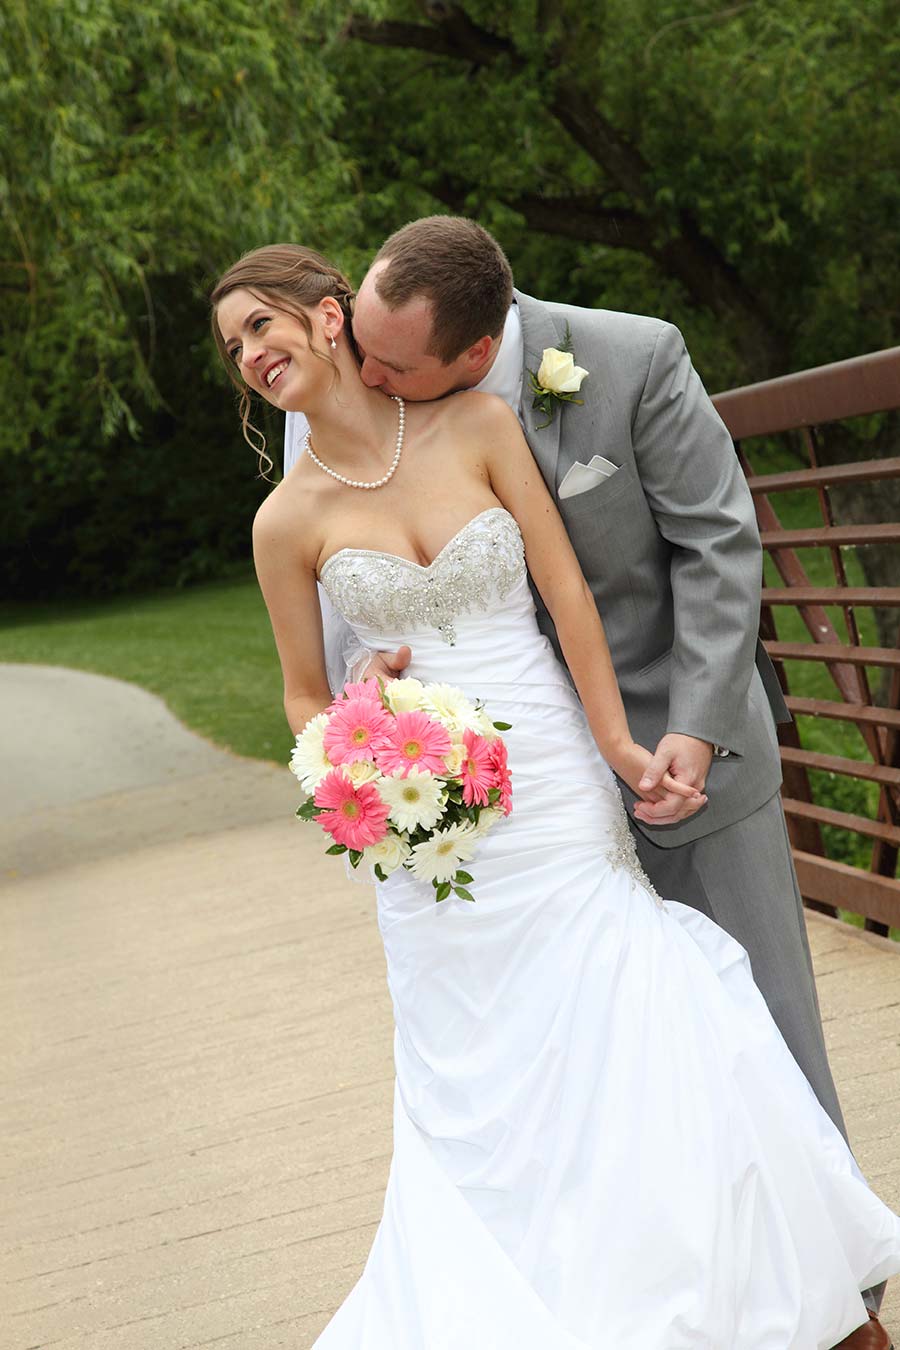 the groom gently kisses his bride's neck while she smiles